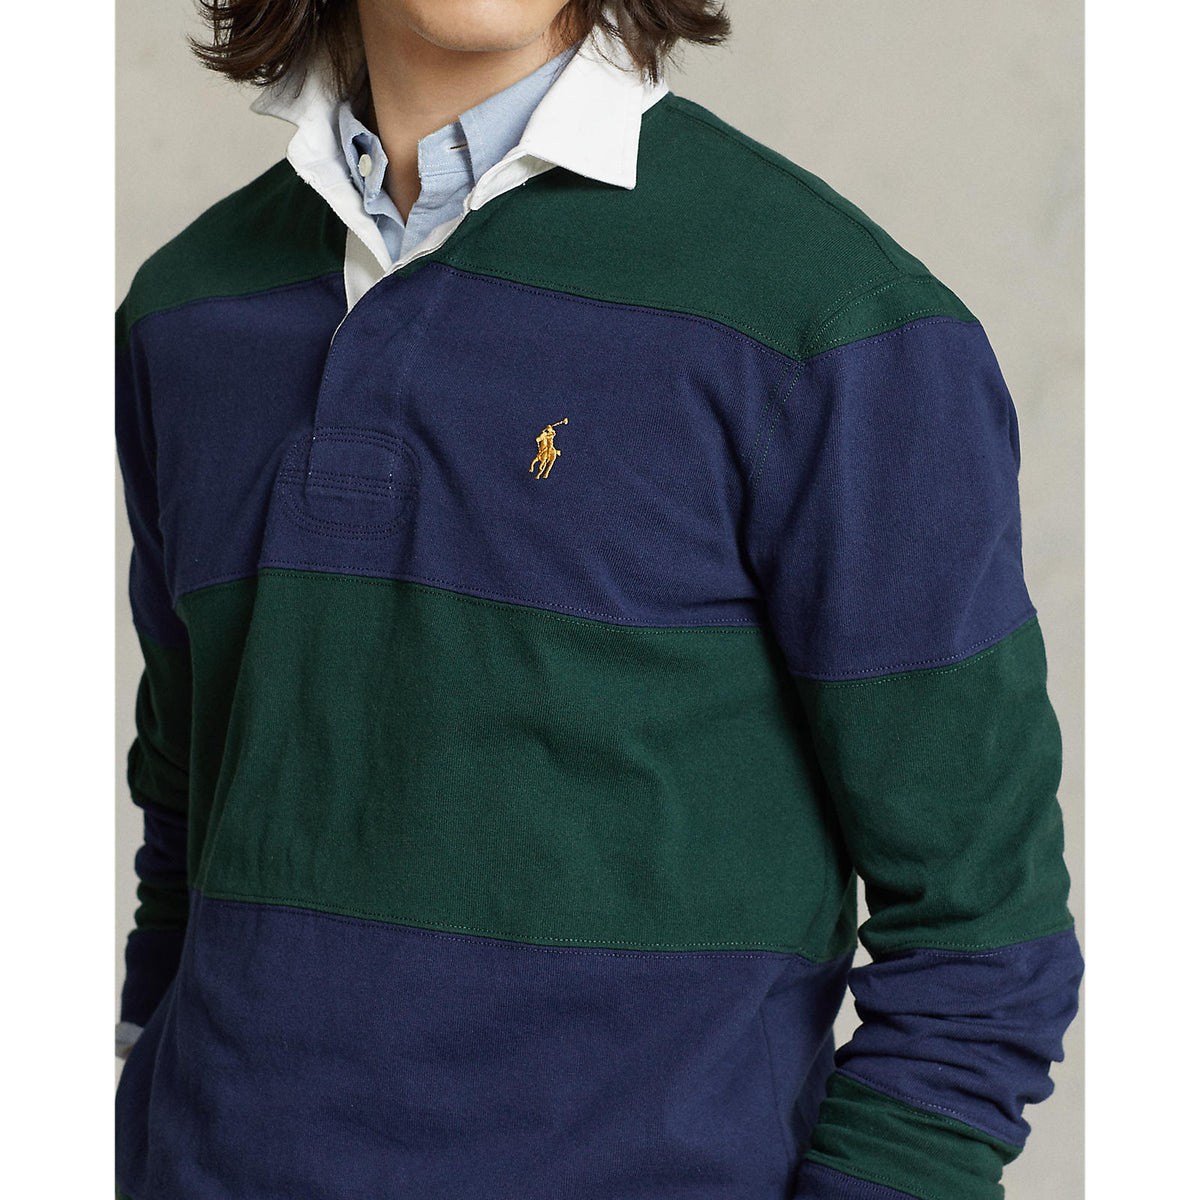 Iconic Rugby Shirt - Newport Navy & College Green | Blowes Clothing